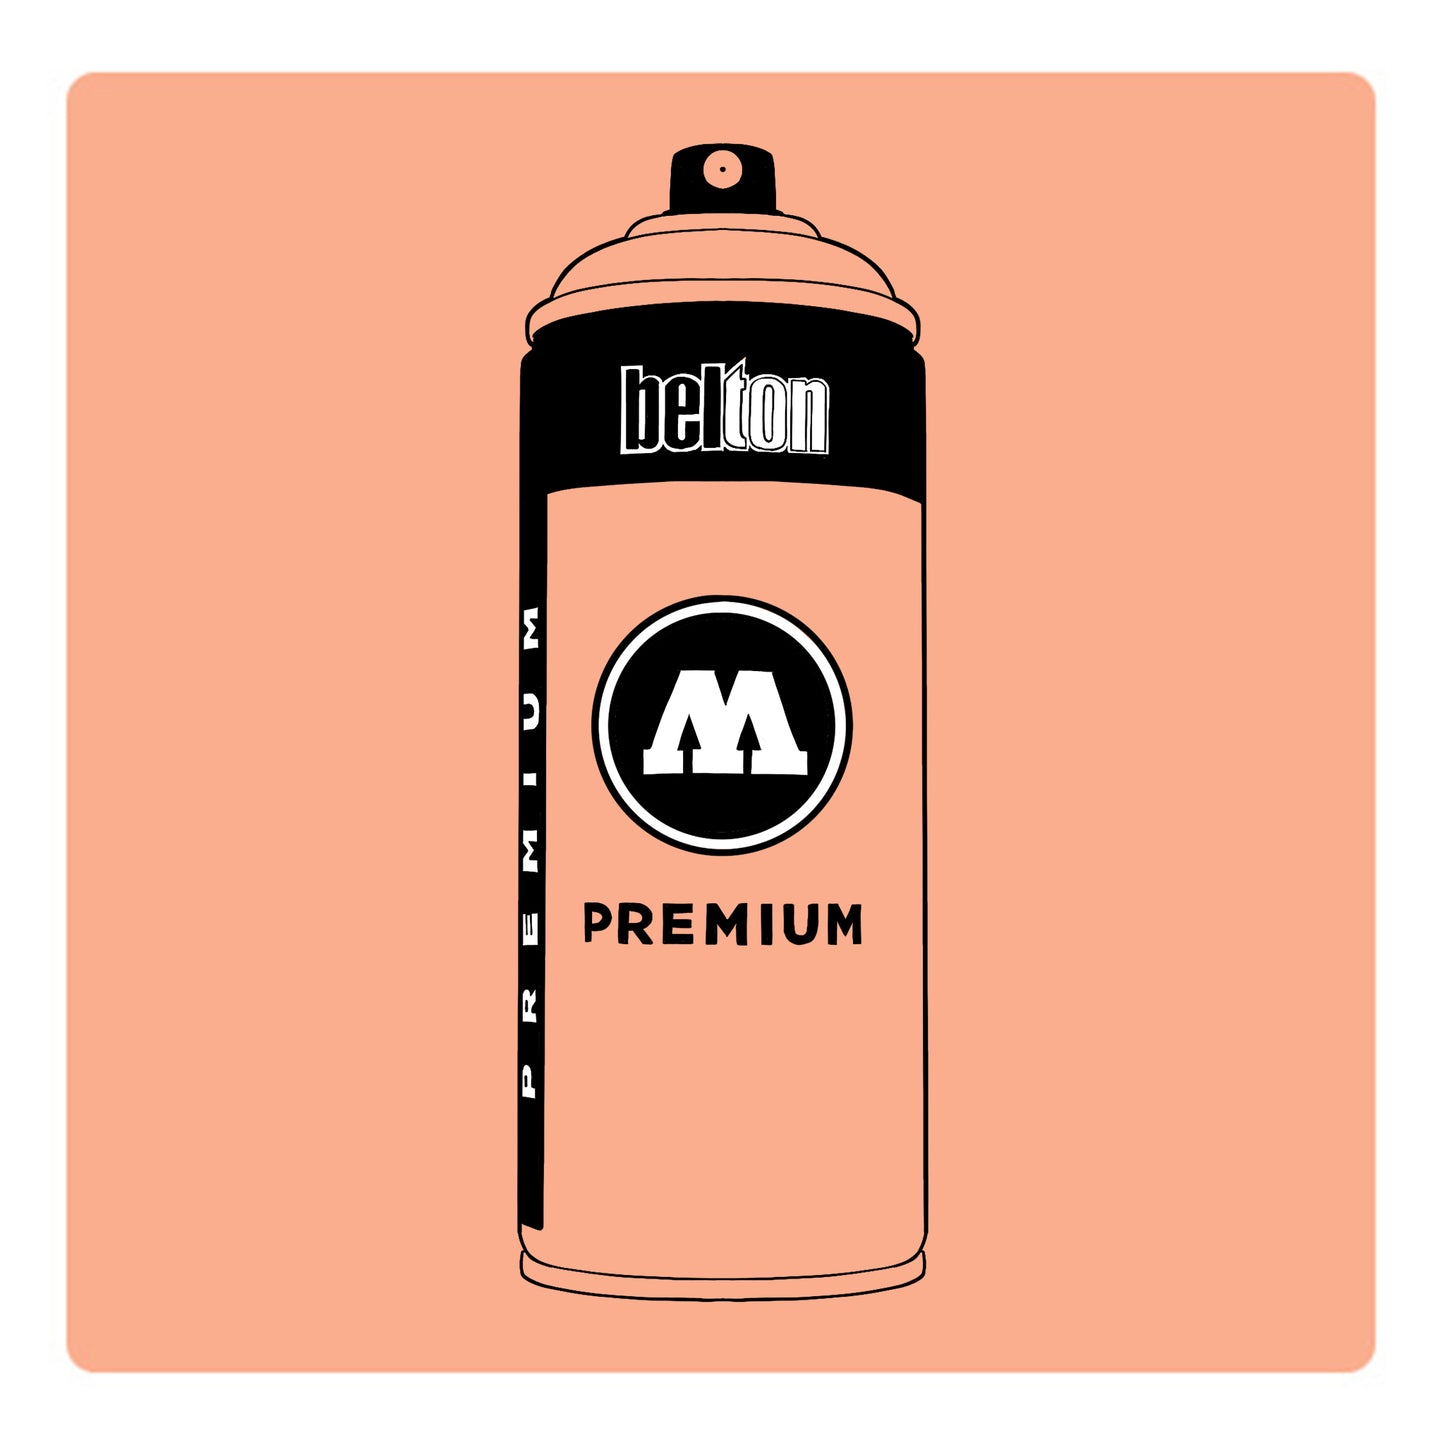 A black outline drawing of a light peach spray paint can with the words "belton","premium" and the letter"M" written on the face in black and white font. The background is a color swatch of the same Light Peach with a white border.